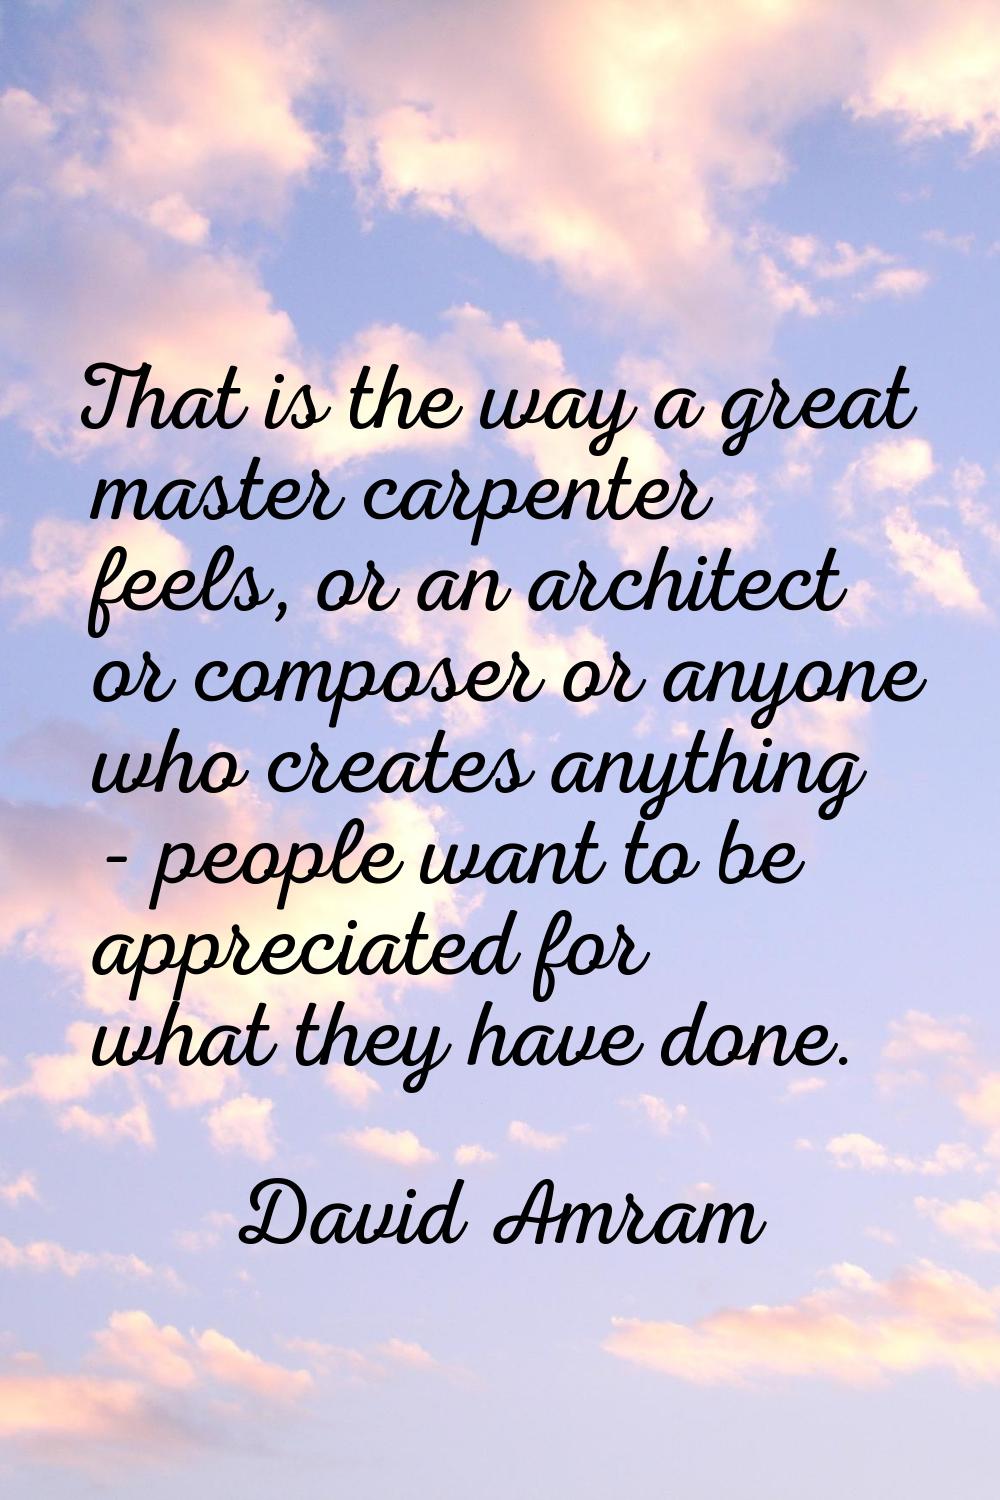 That is the way a great master carpenter feels, or an architect or composer or anyone who creates a